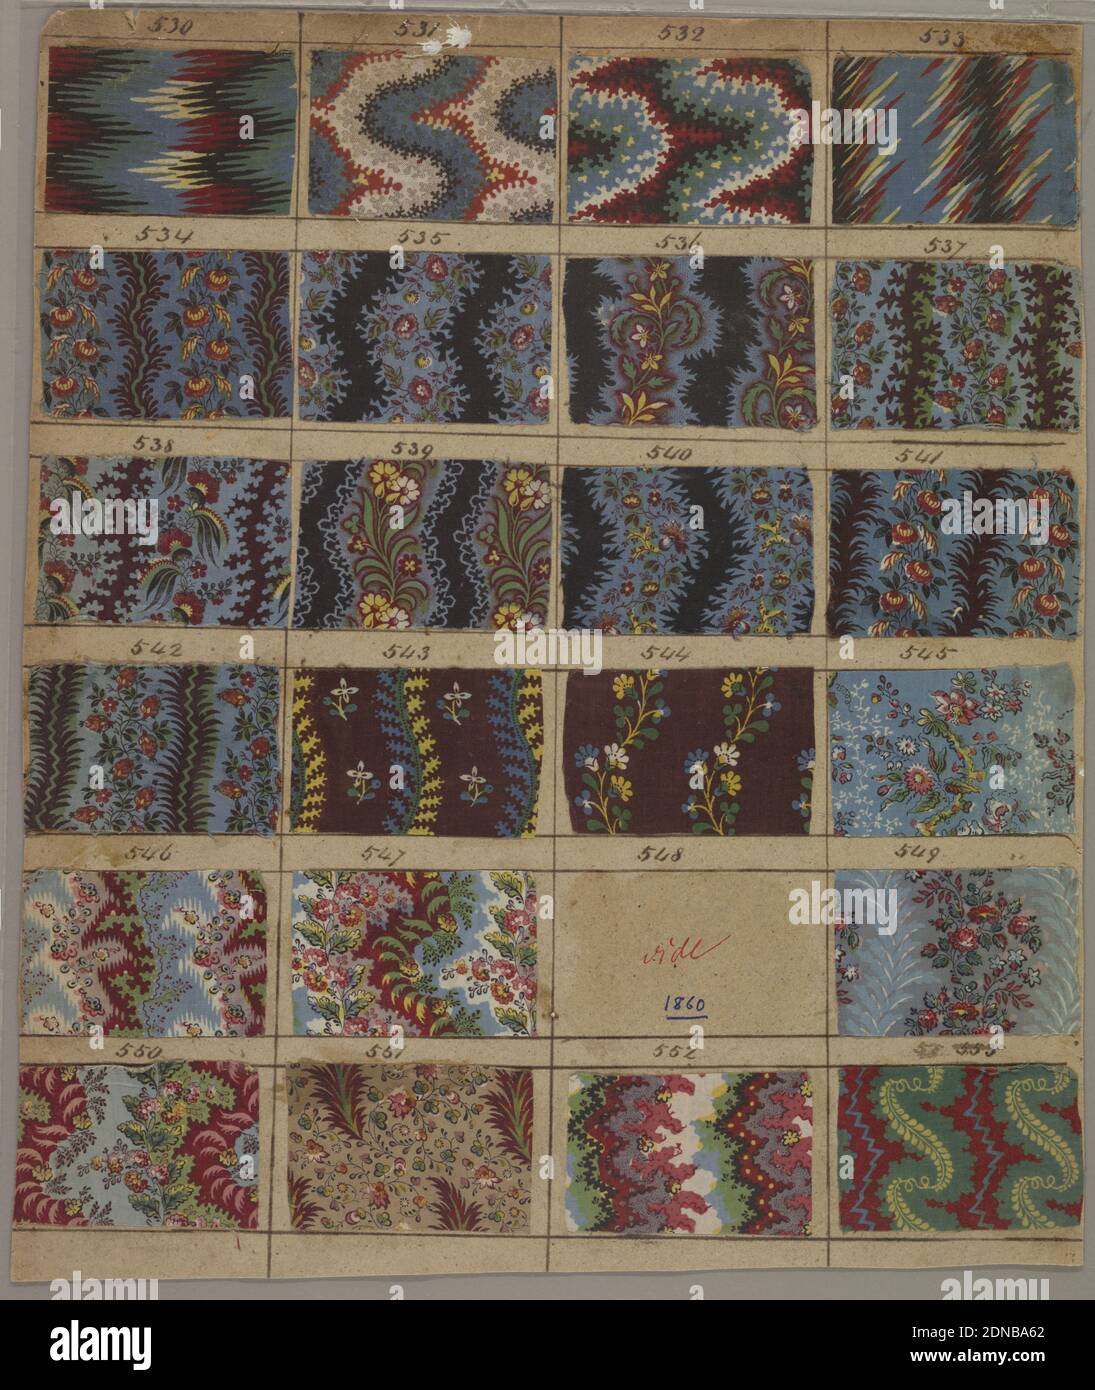 Textile, Medium: paper, cotton Technique: printed, Forty-six swatches of printed fabric (twenty-three per side of page – one missing on each side) each numbered in pen and ink from 506 through 529. Each swatch measures about 5.5 x 8 cm. (2 1/8' x 3 1/8'). All patterns are small scale floral in at least three colors. Yellow over blue for green., England, ca. 1825, printed, dyed & painted textiles, Textile Stock Photo